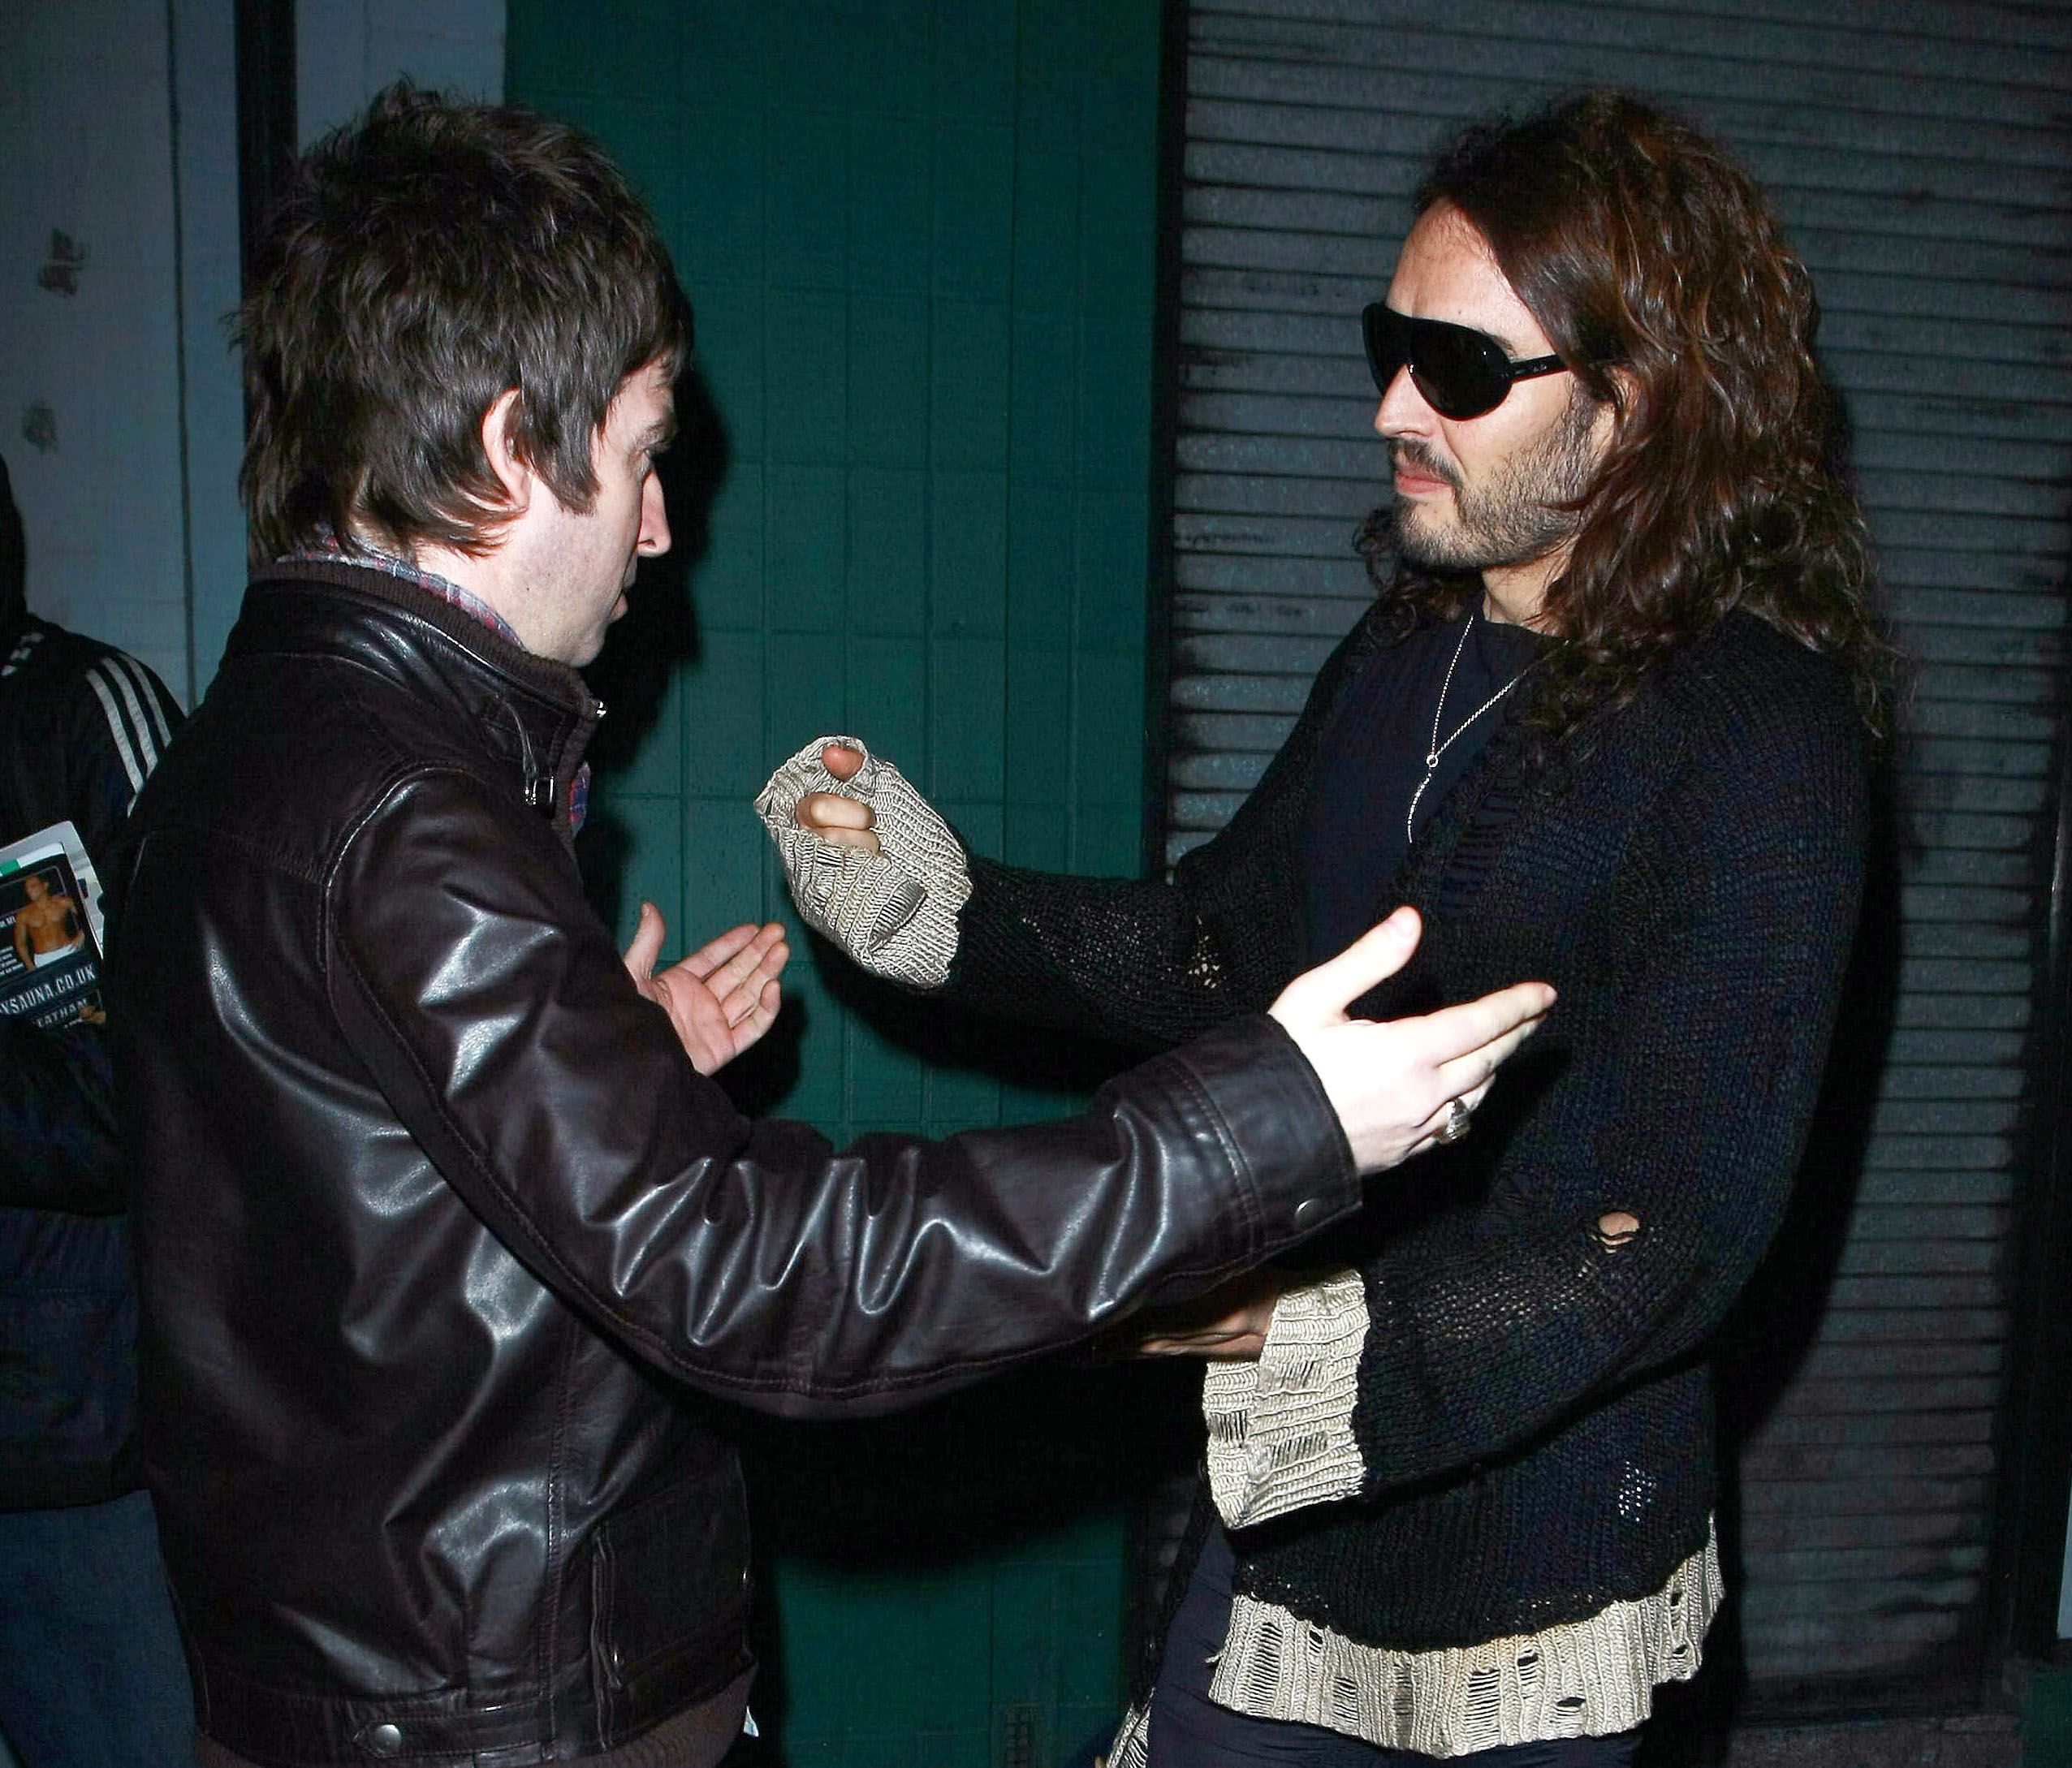 Noel Gallagher and Russel Brand spotted leaving The Groucho Club in London, UK